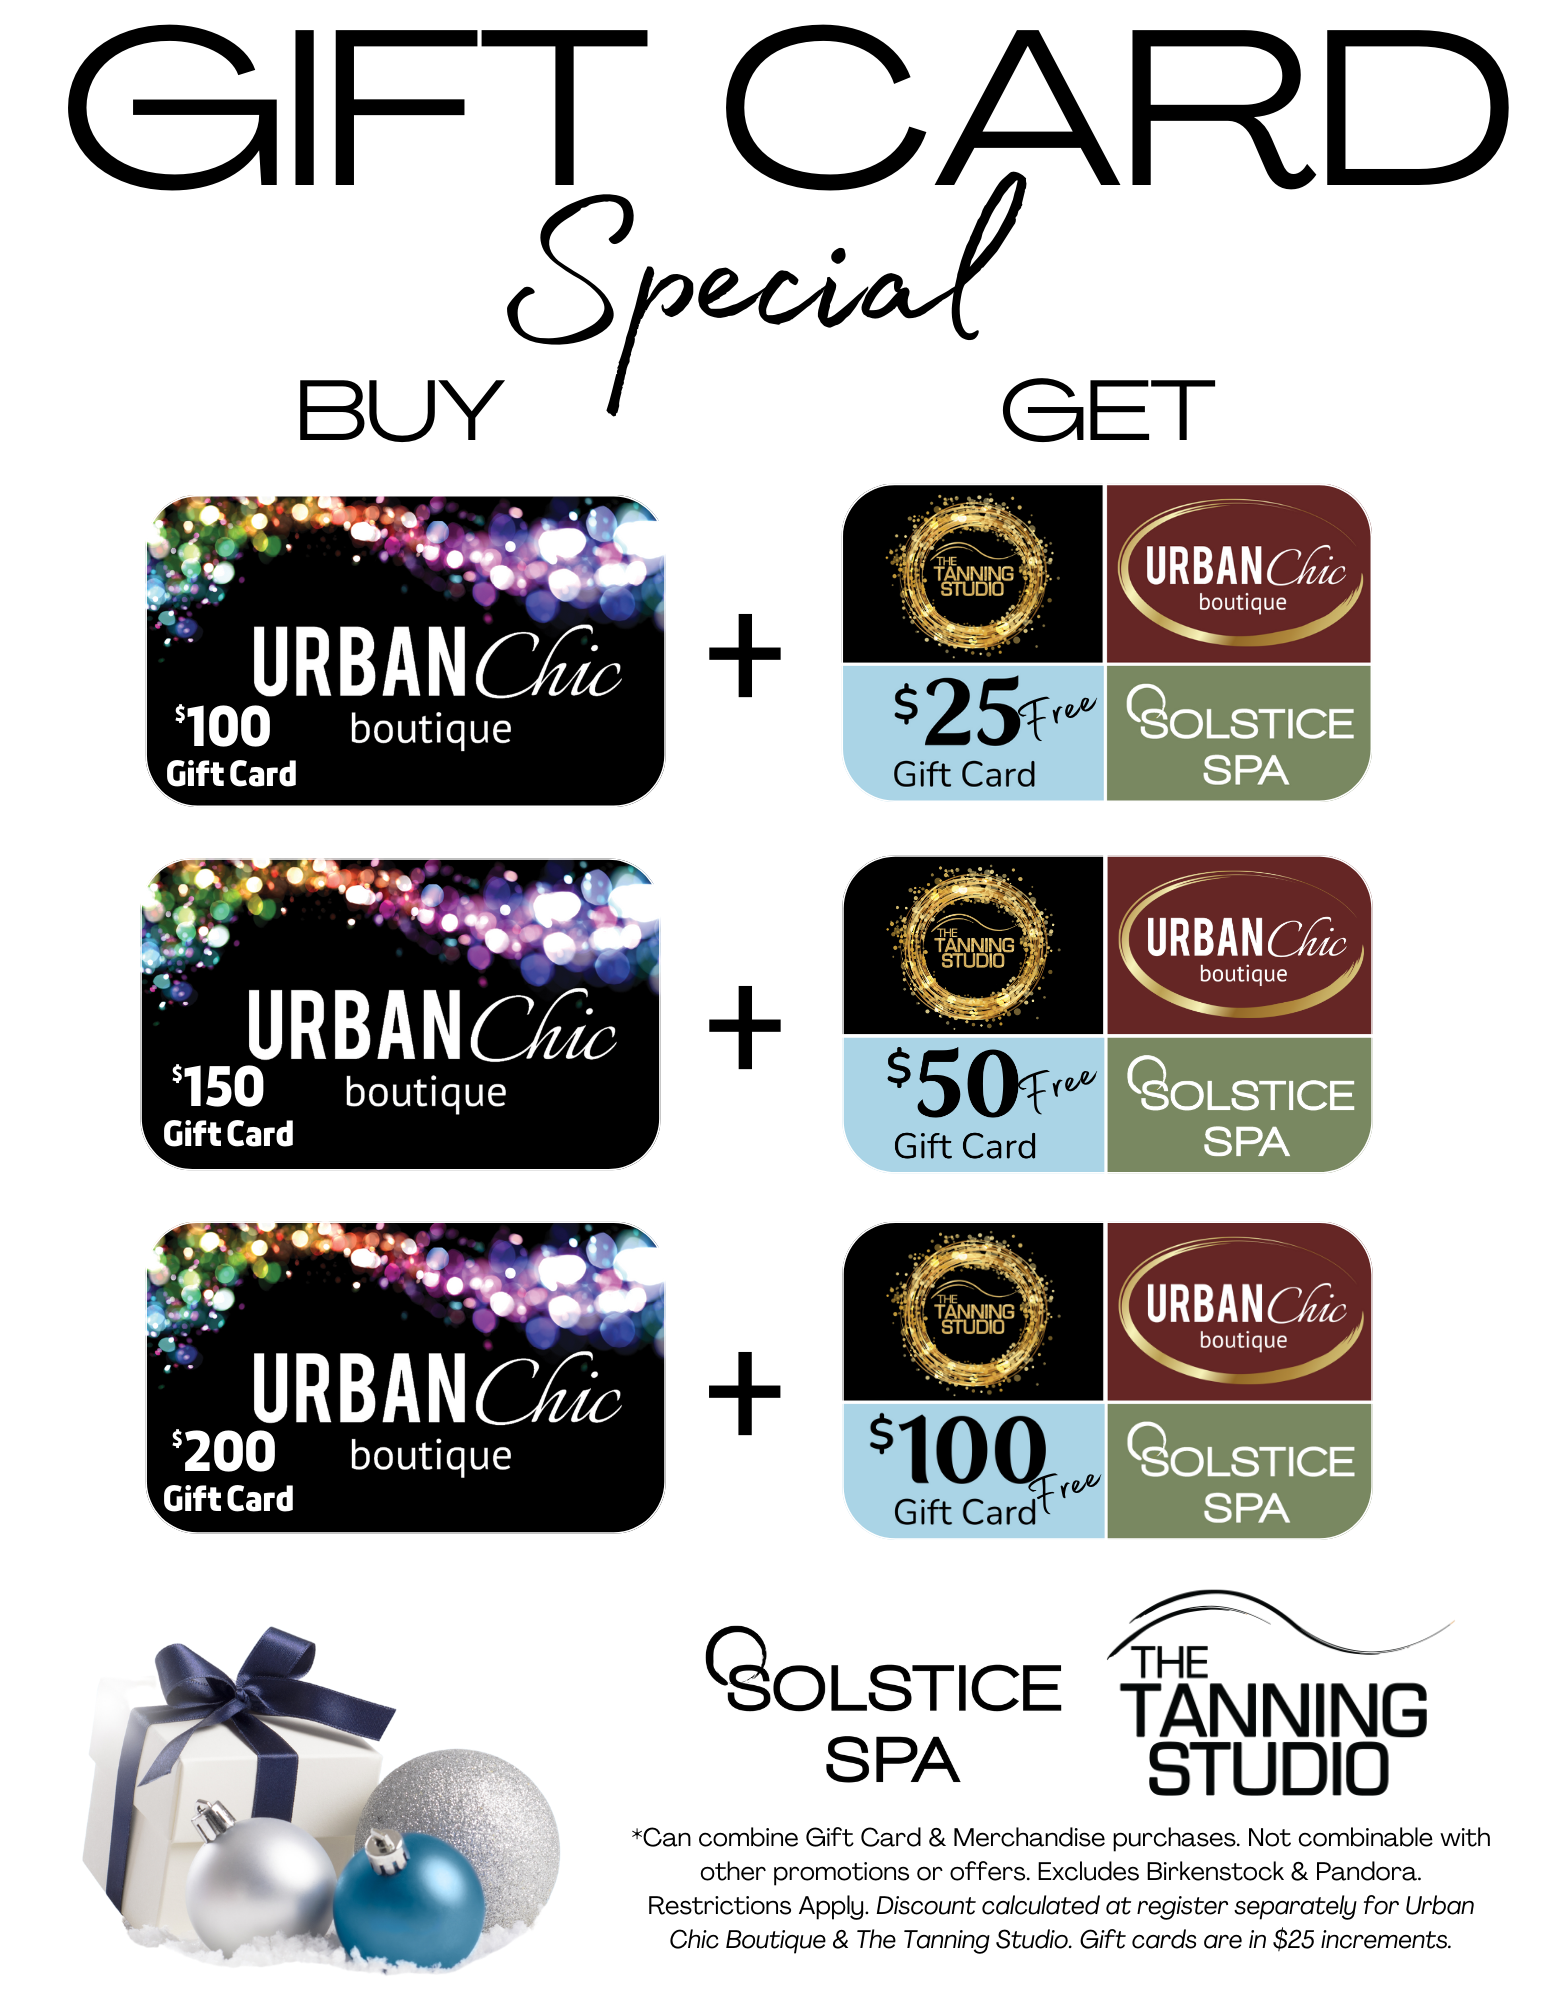 Urban Chic Boutique Gift Card Special